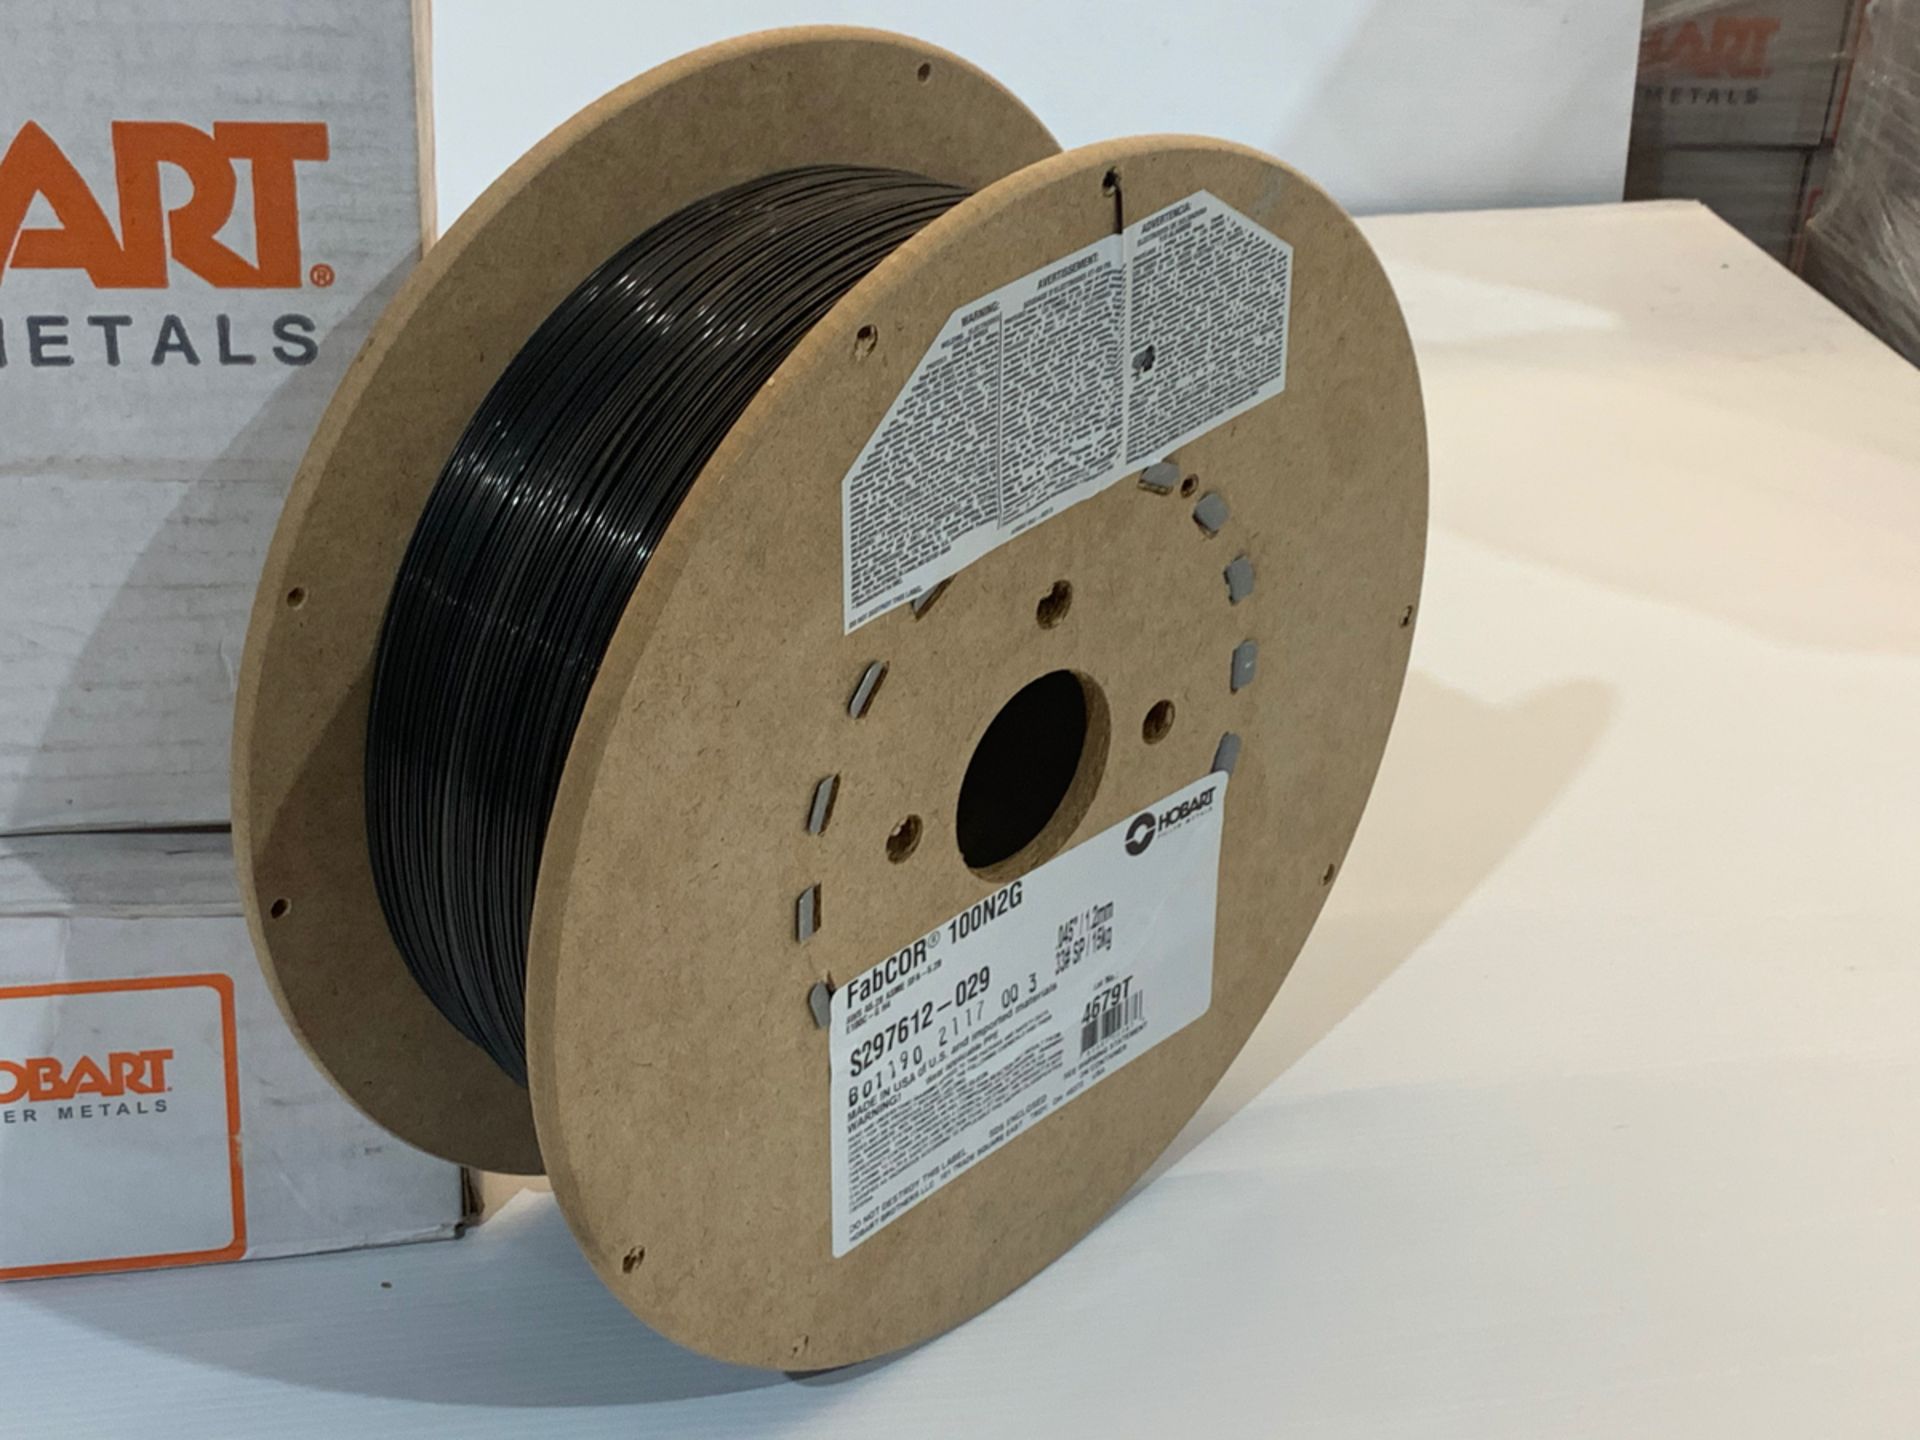 HOBART STL WELDING WIRE FABCOR 100N2G, DIA.: 0.045” (1.2mm), 15KG SPOOL/BOBINE *** DUE TO COVID - Image 3 of 3